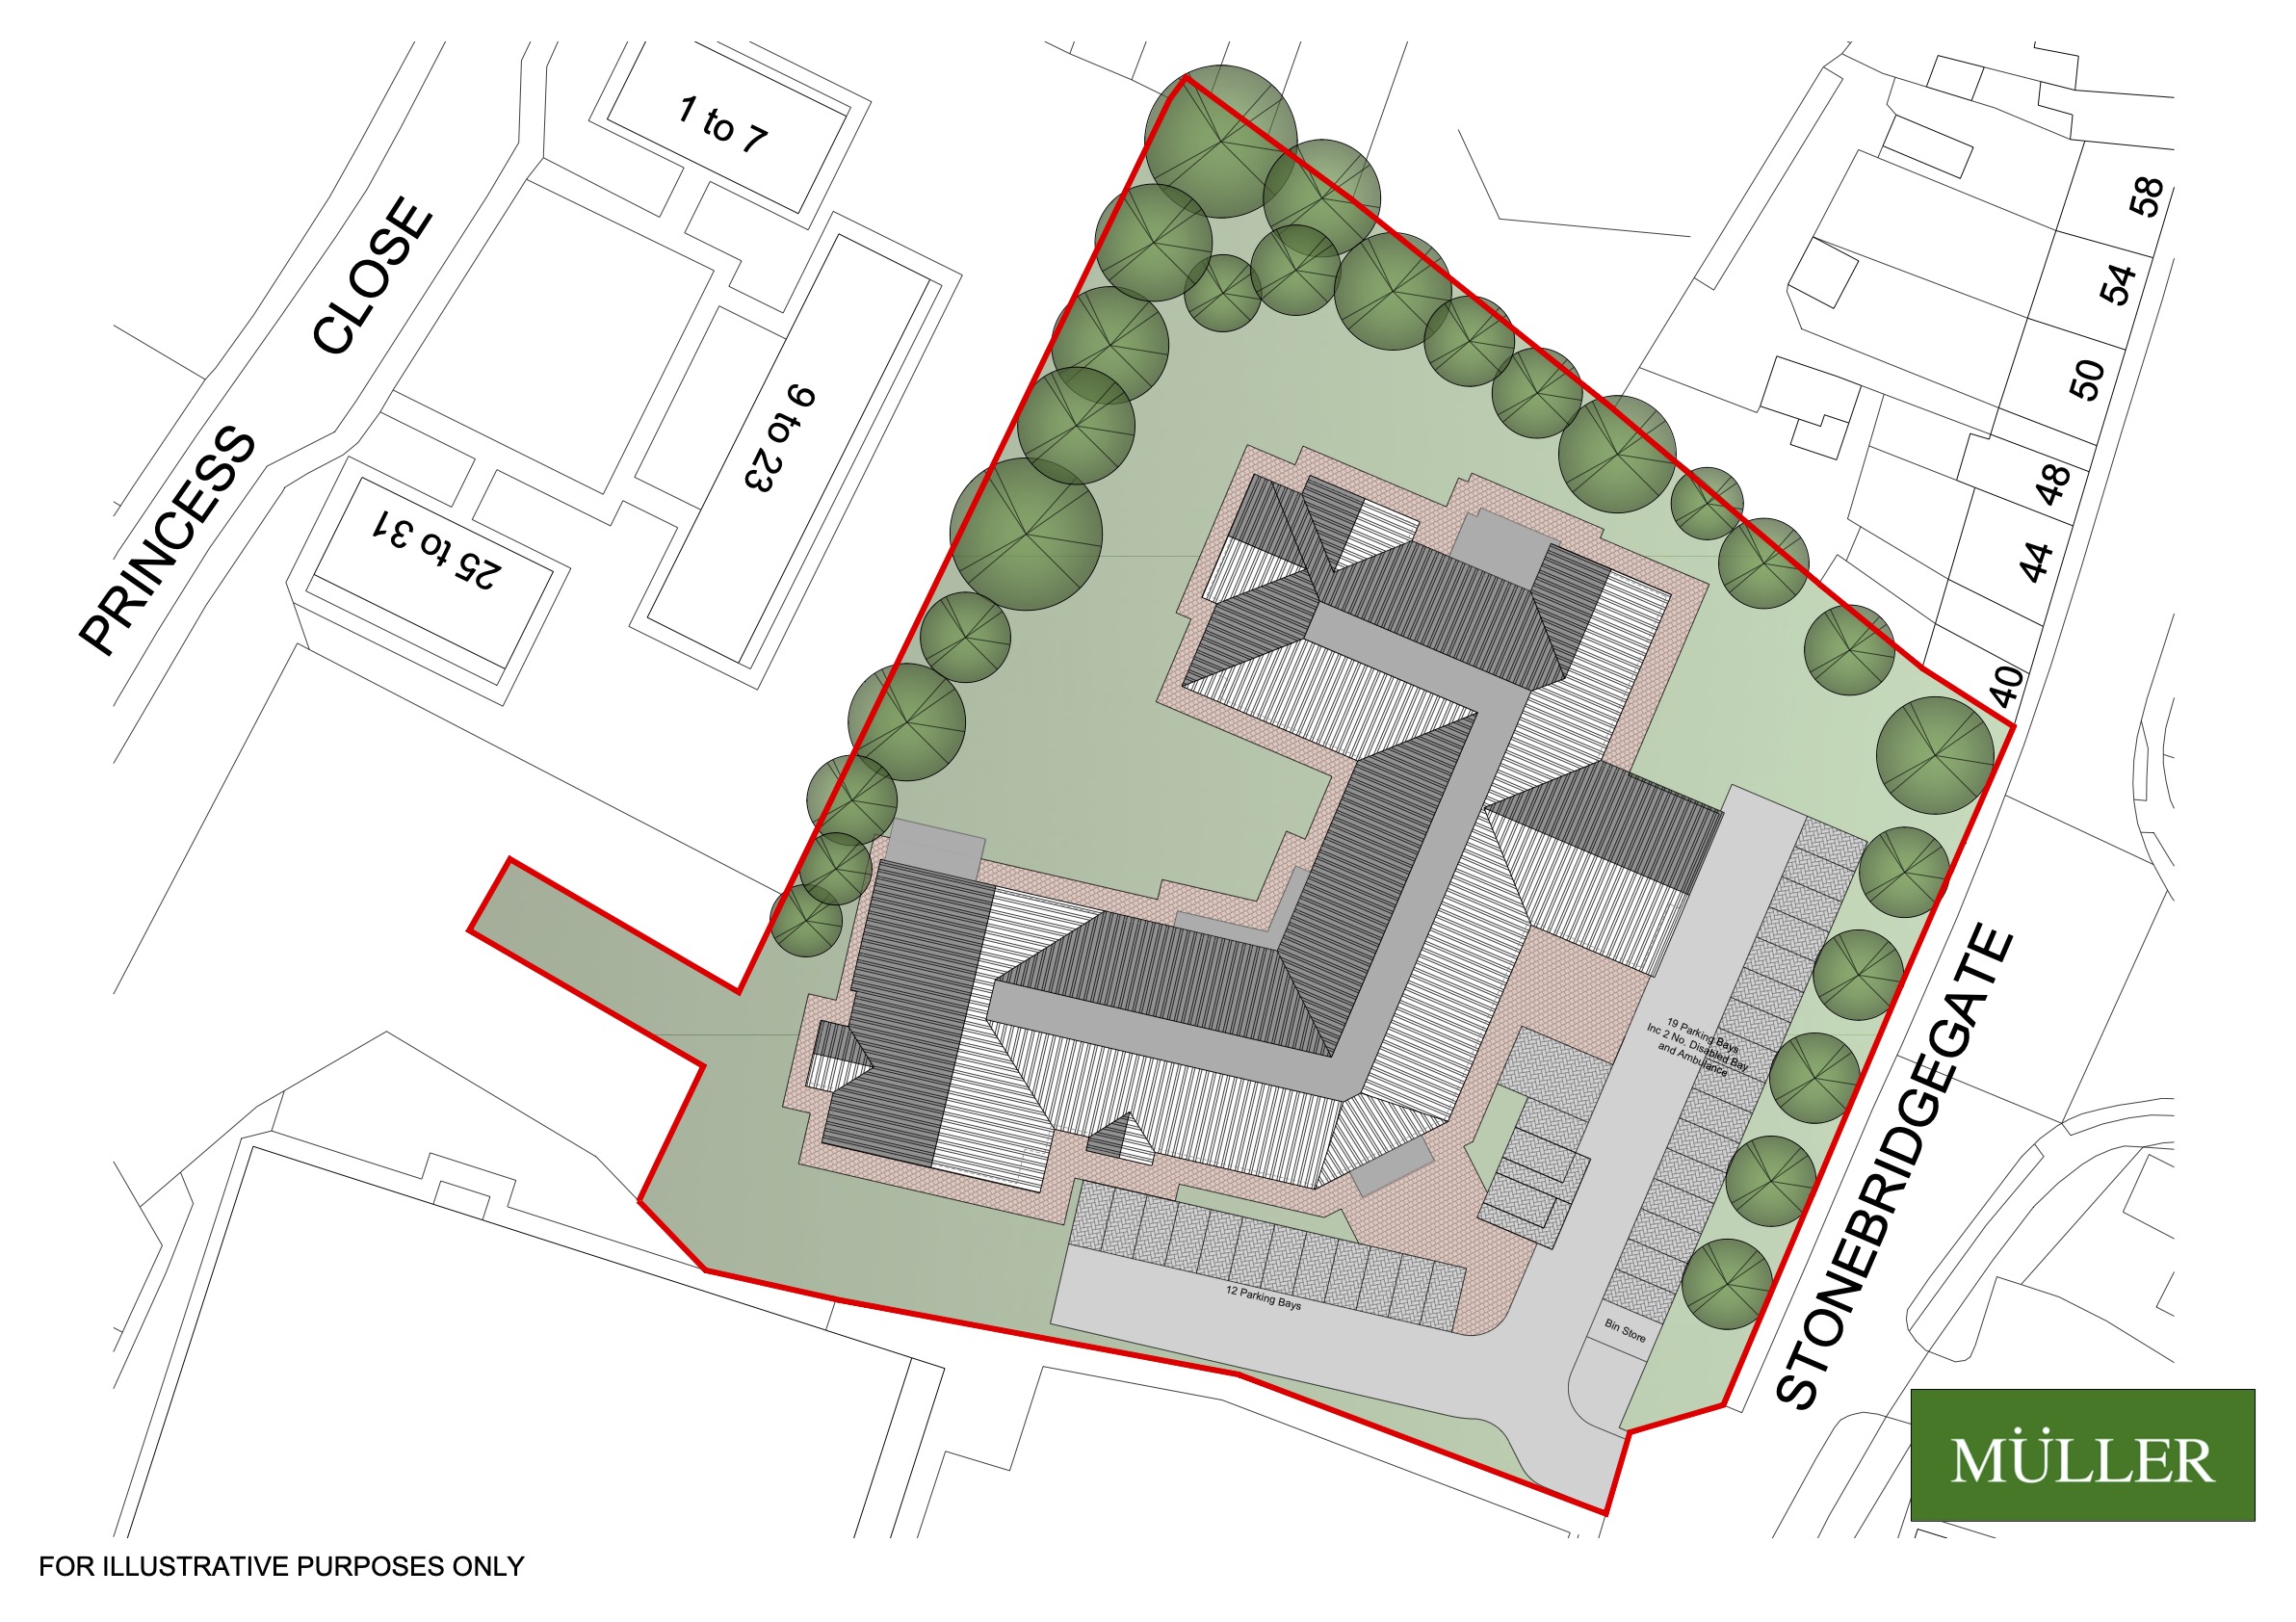 Indicative site plan of an 80-bed care home in Ripon, North Yorkshire